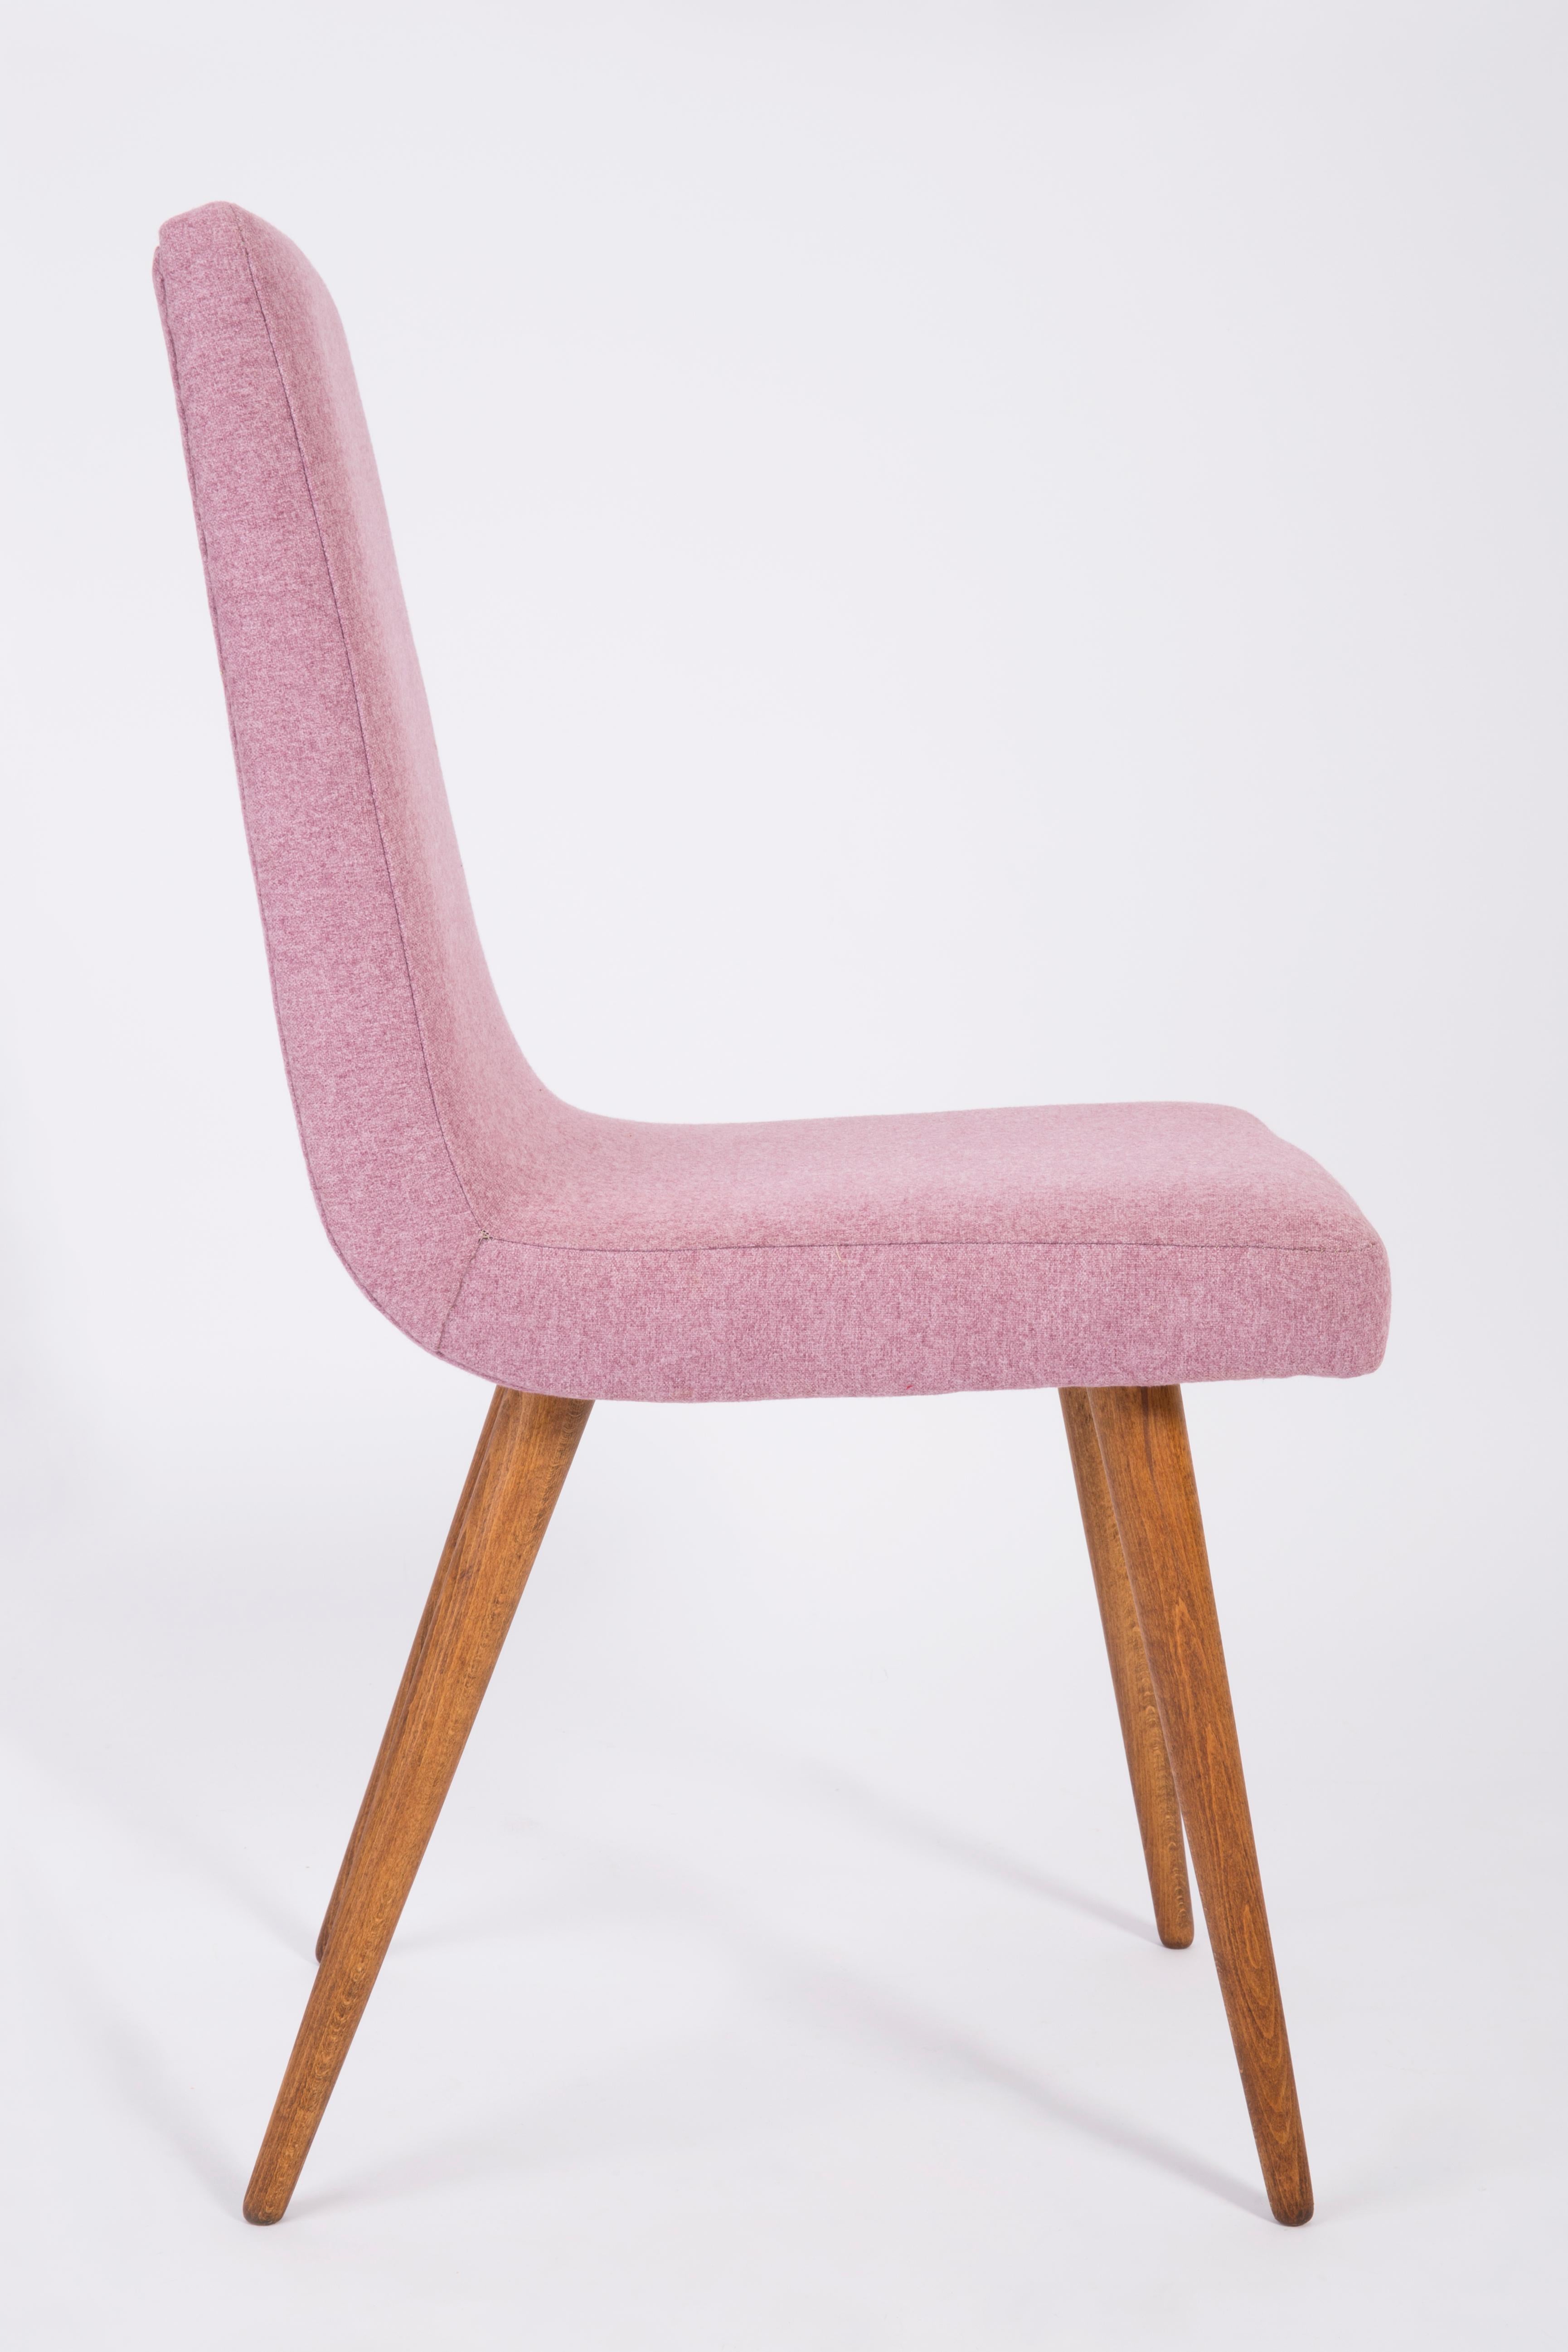 Set of Four Mid-Century Vintage Pink Melange Chairs, Europe, 1960s For Sale 3